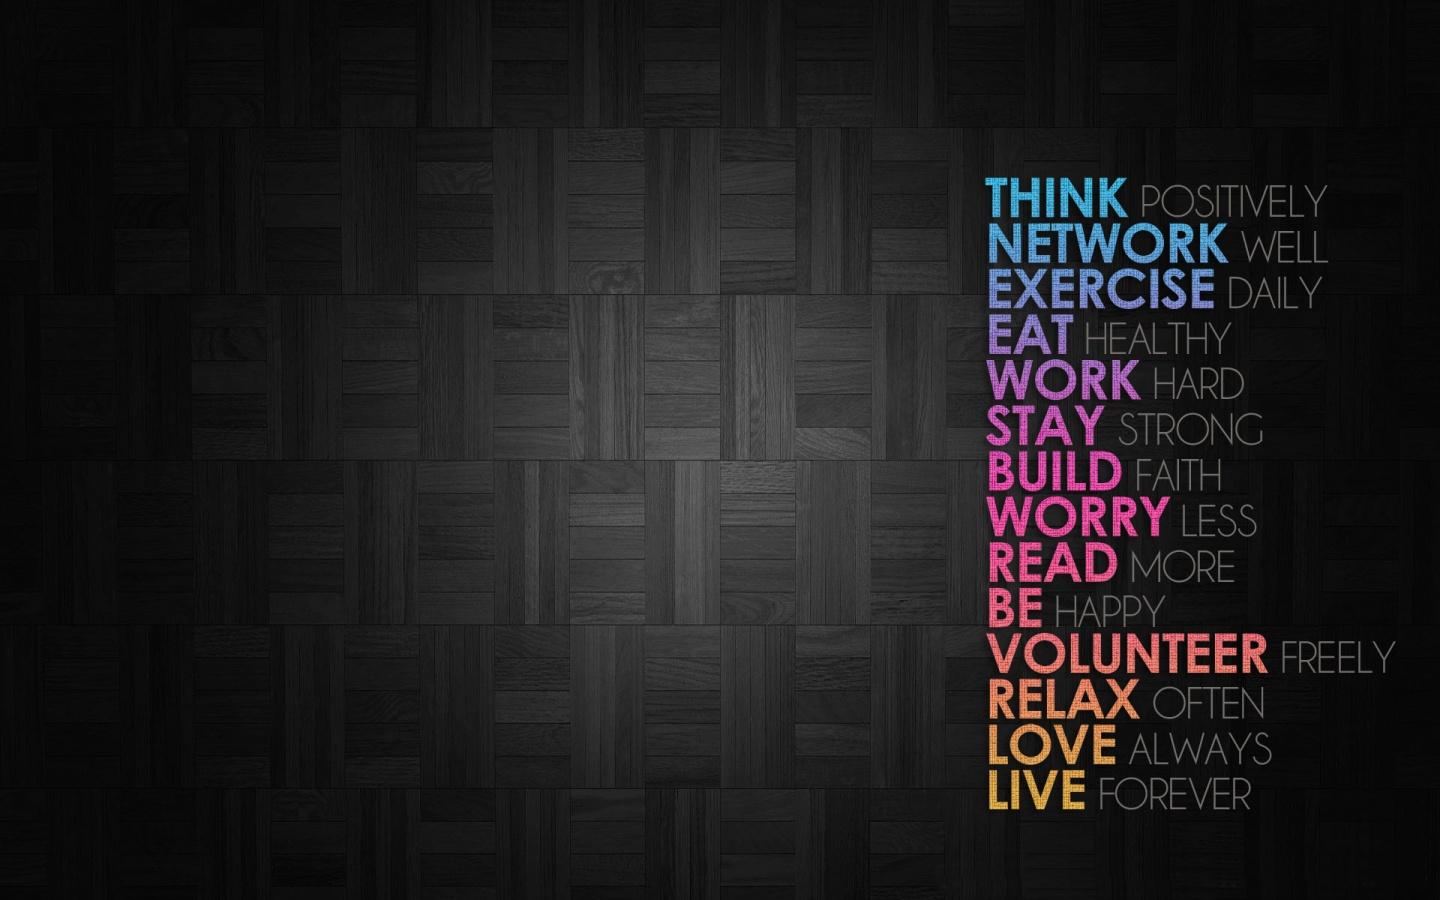 positive thinking wallpapers